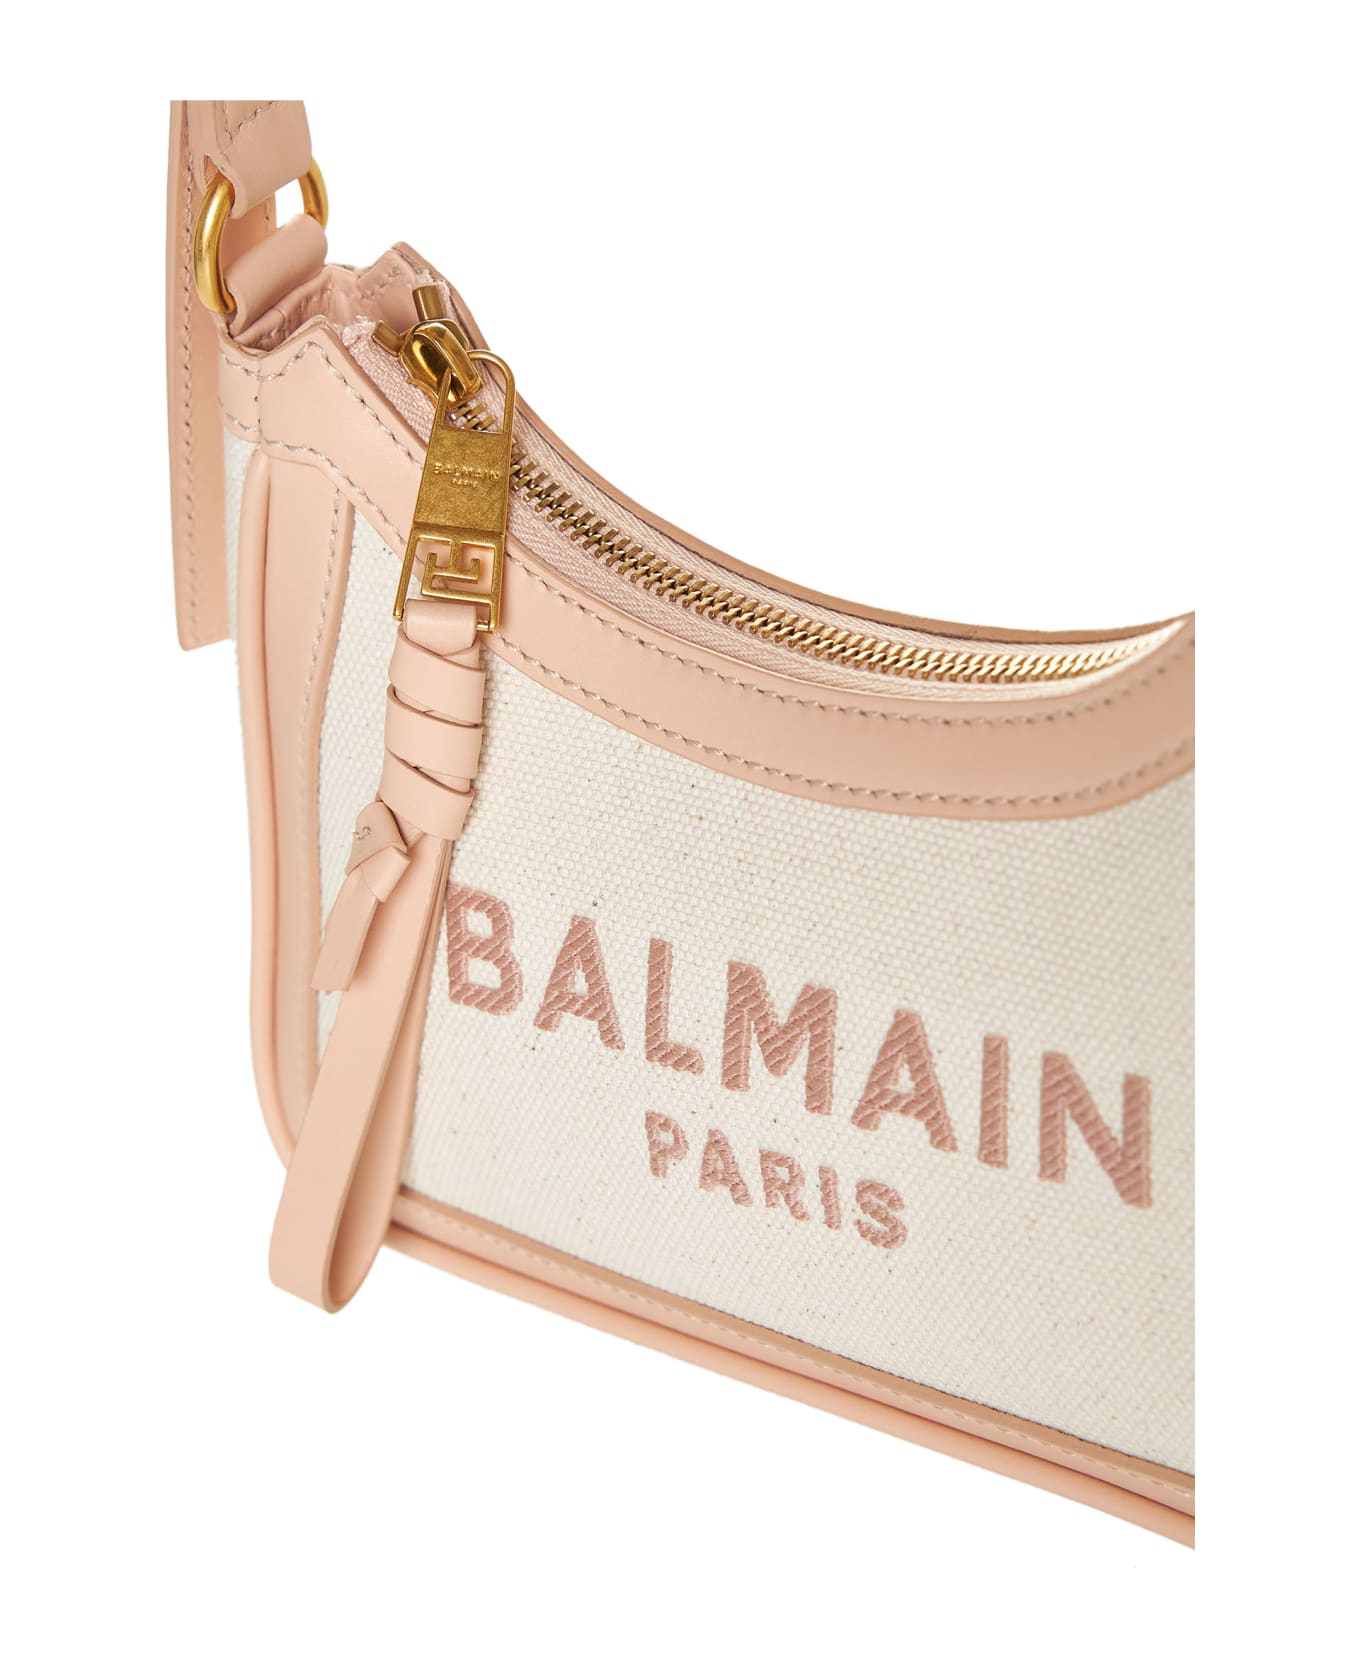 Balmain B-army 26 Bag In Canvas And Leather - Cream